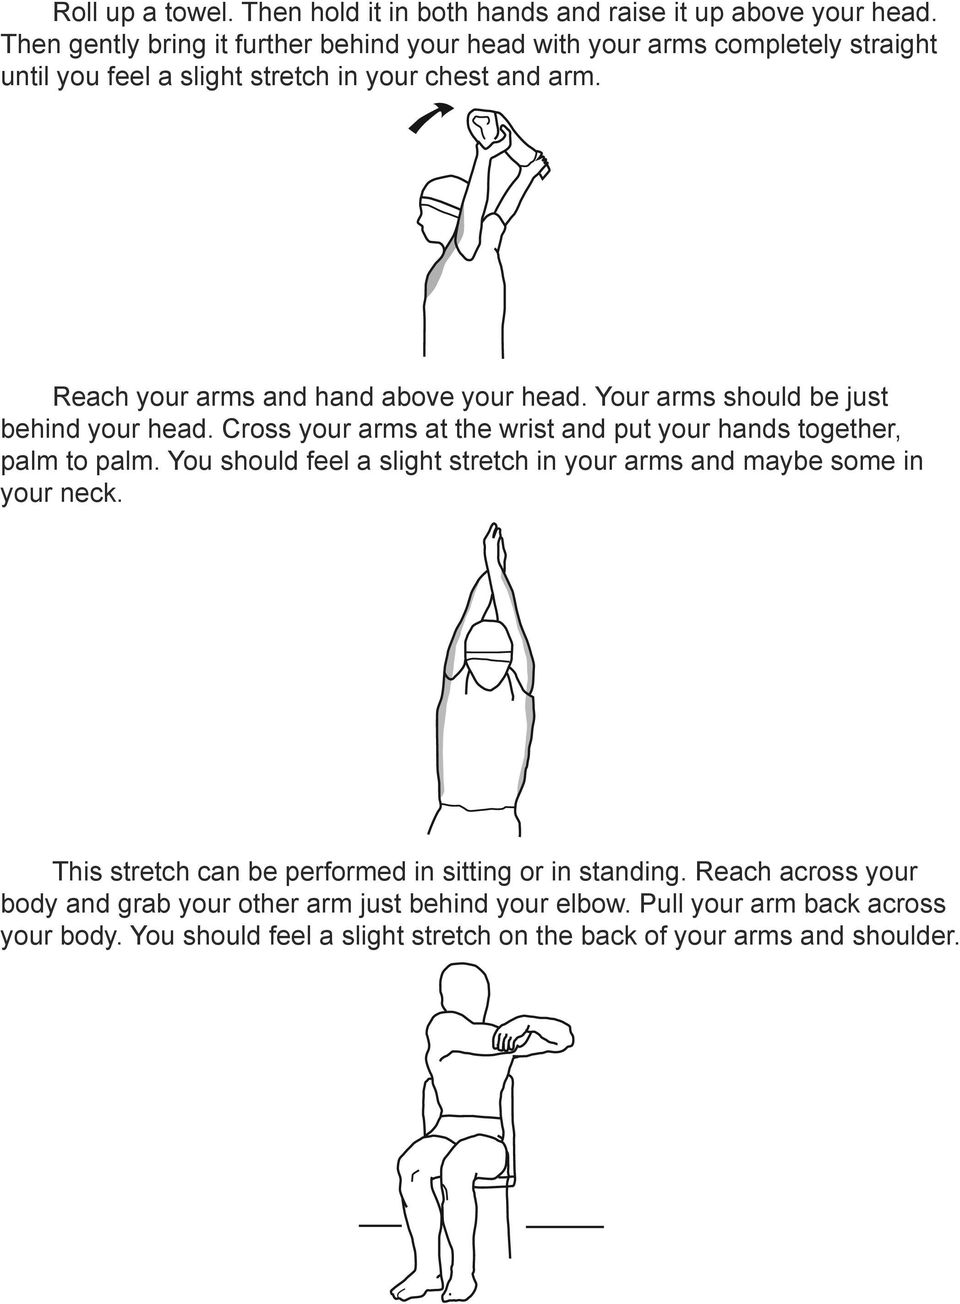 Reach your arms and hand above your head. Your arms should be just behind your head. Cross your arms at the wrist and put your hands together, palm to palm.